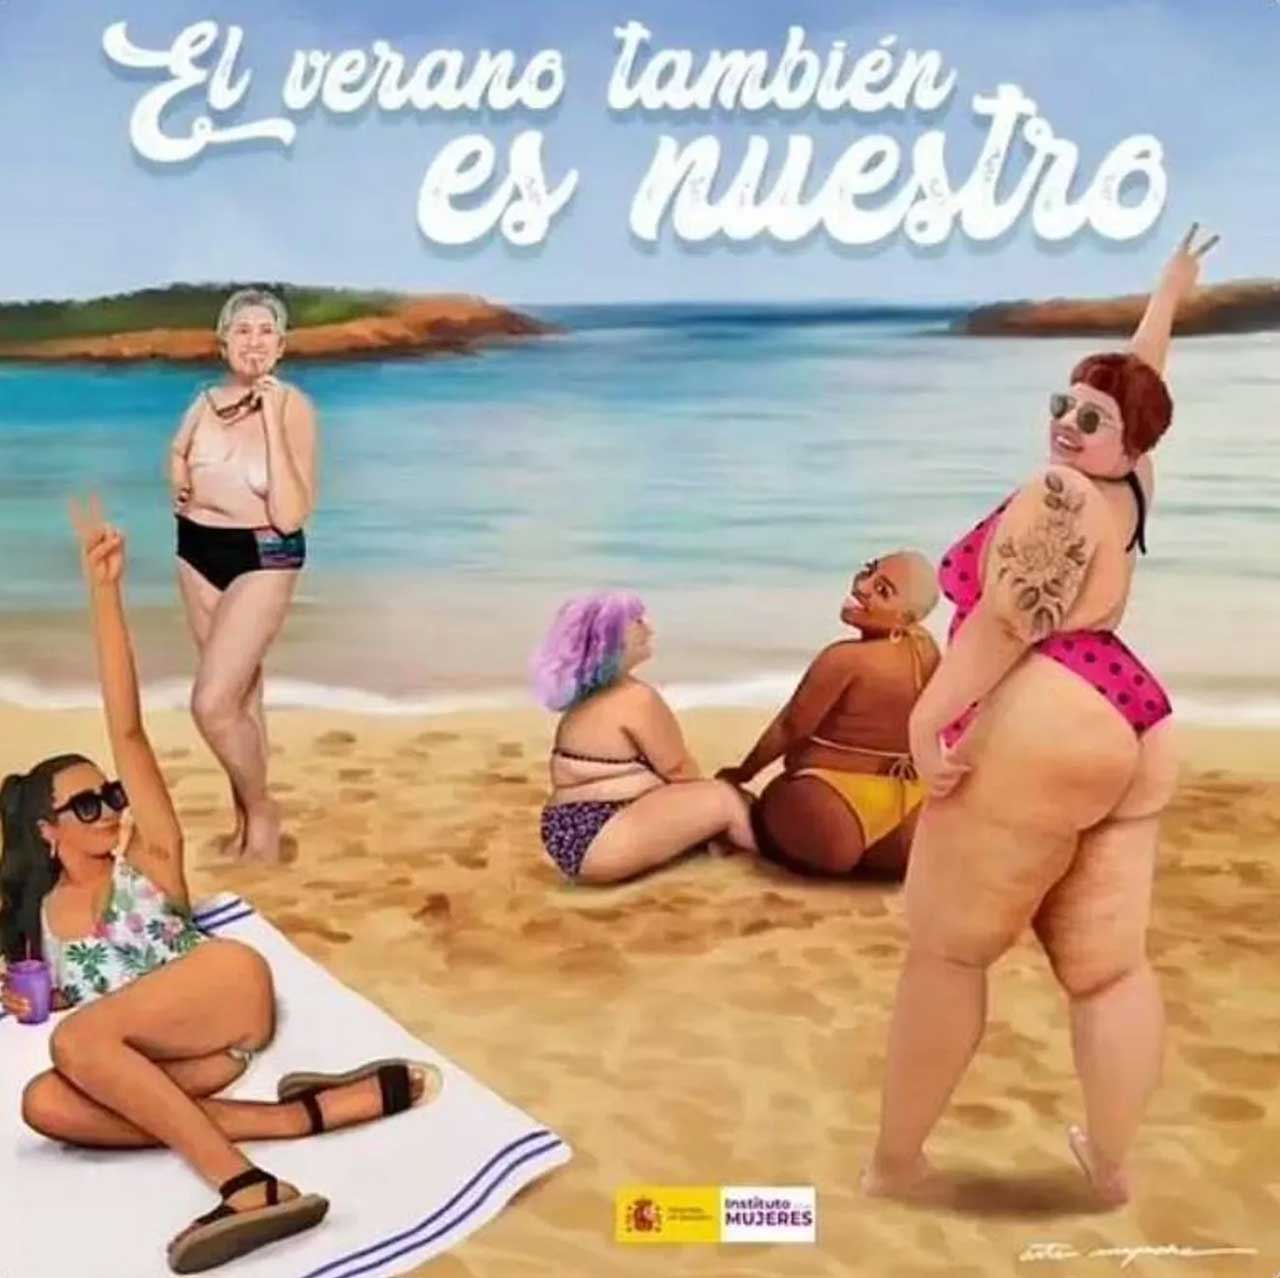 Spain urges women to swim topless to fight sexualization